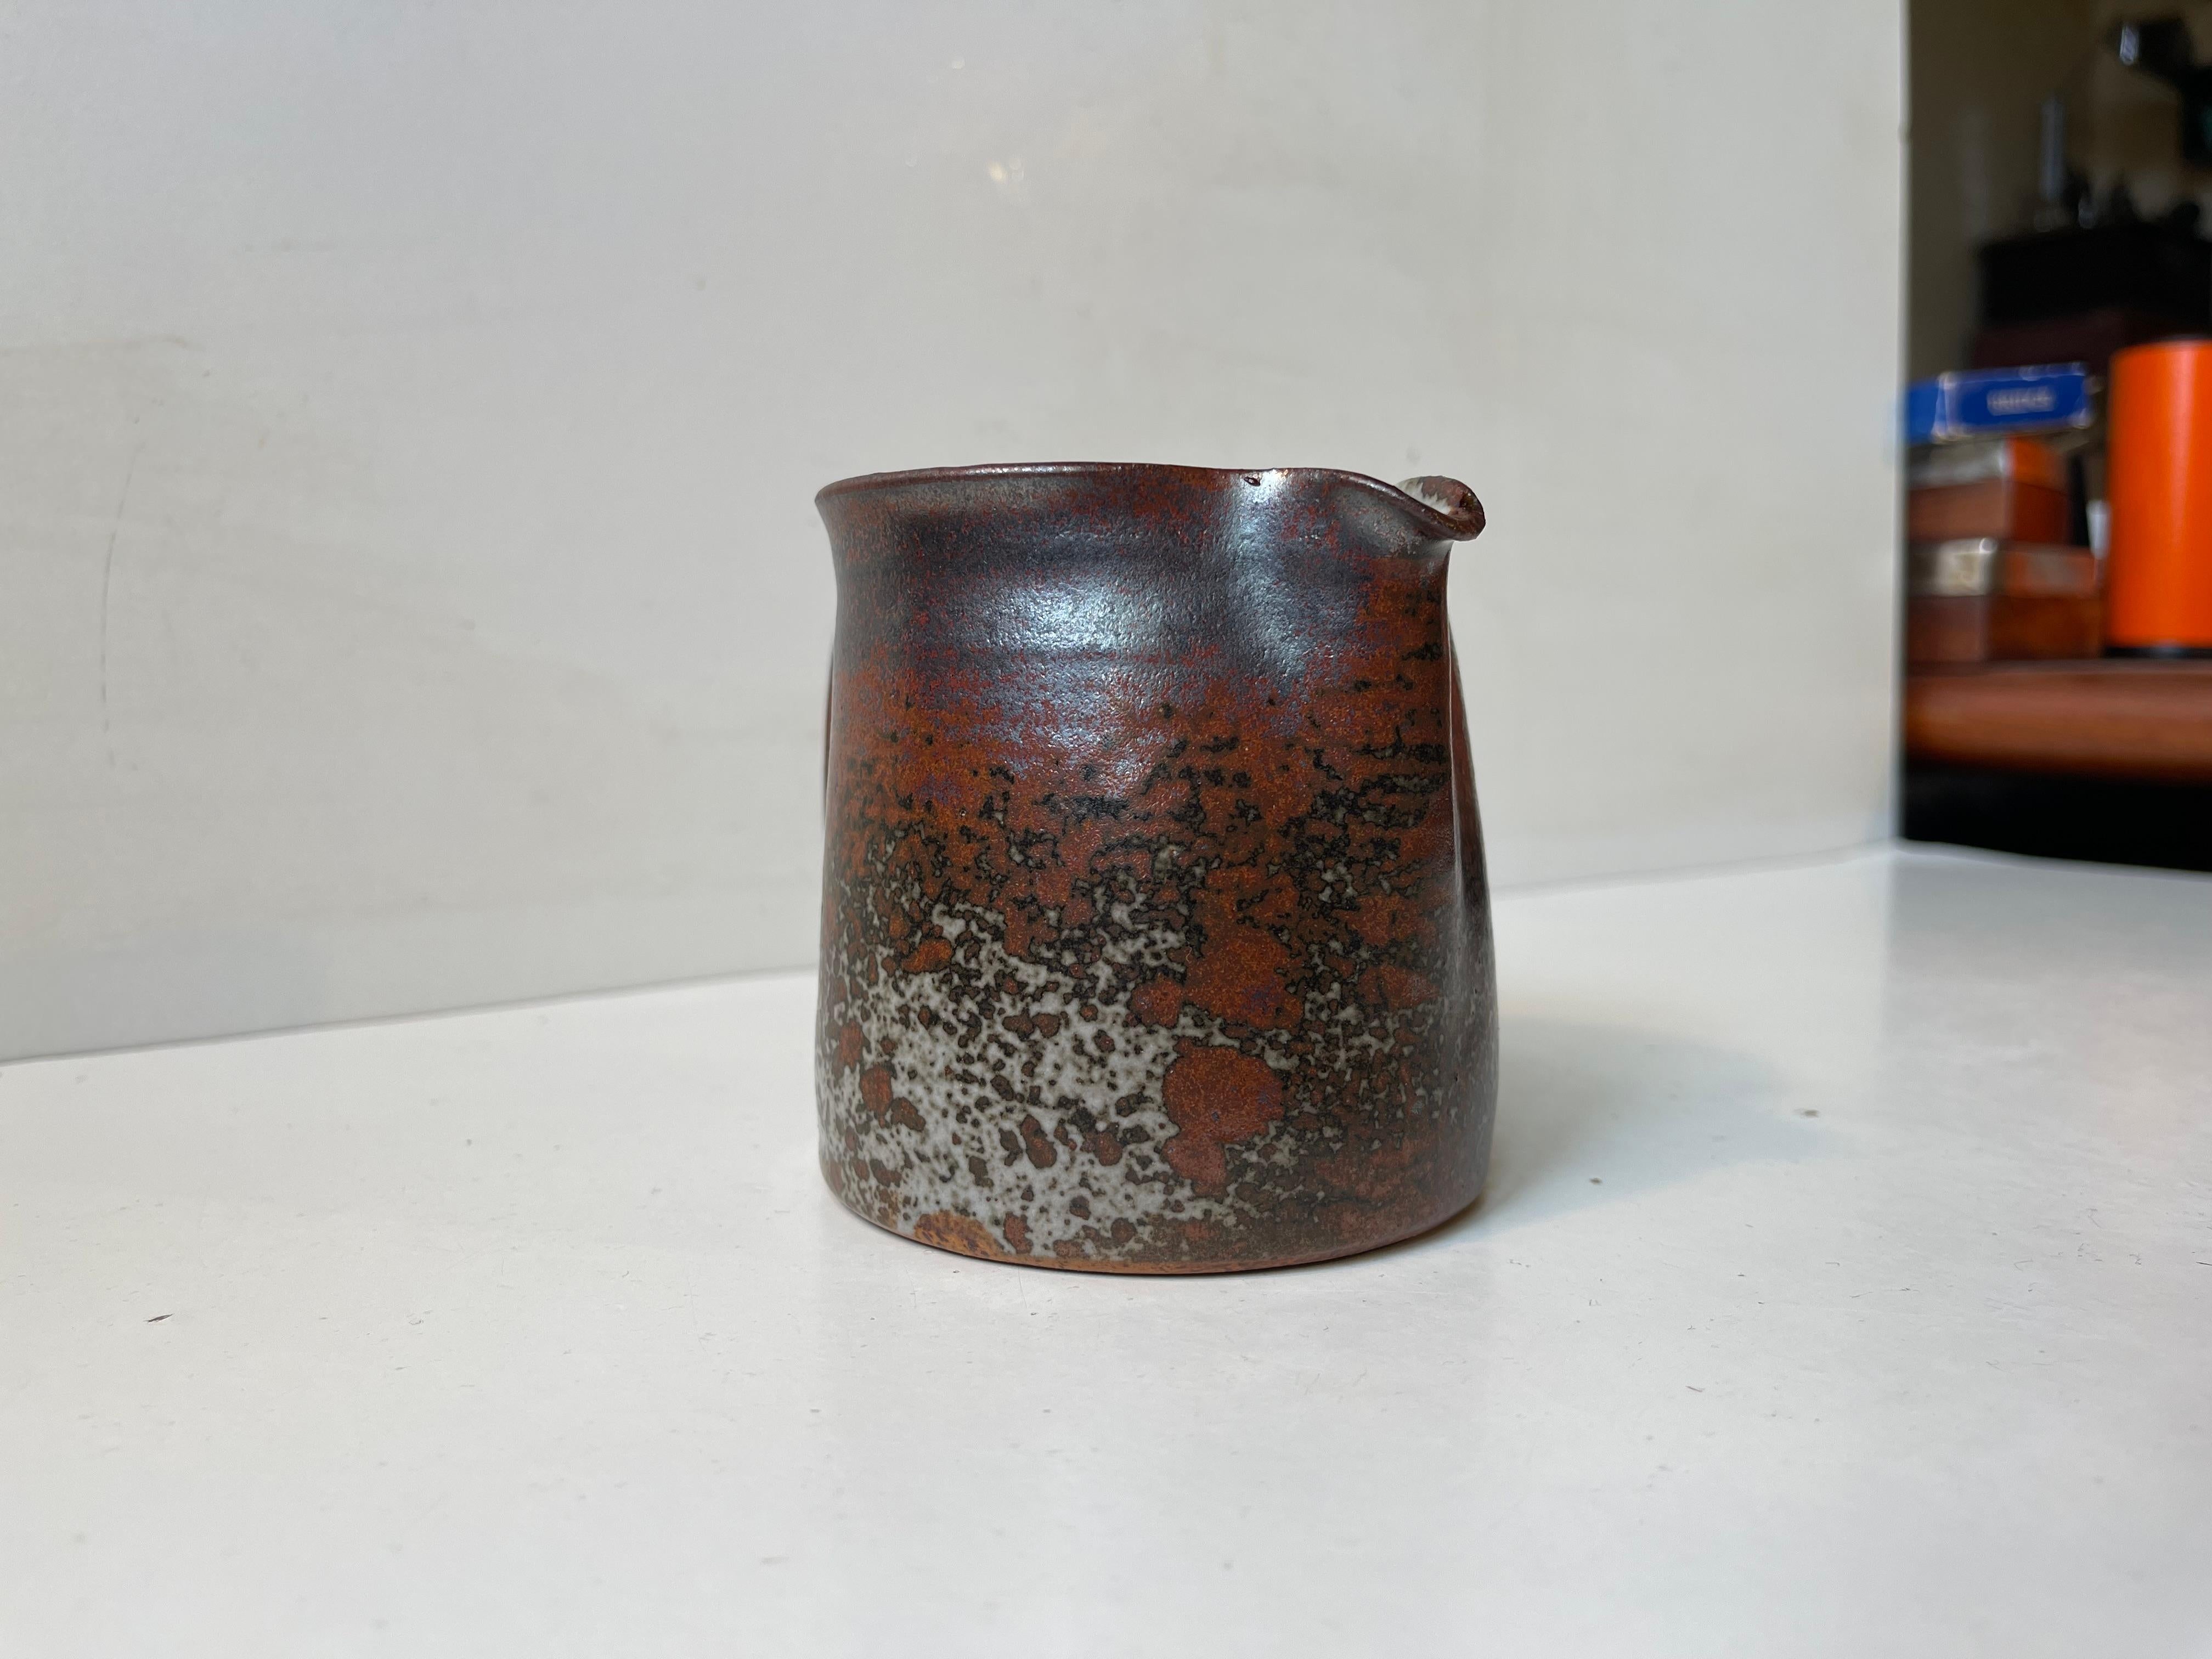 Glazed Jacob E. Bang Small Stoneware Jug in Earthy Glazes, 1960s For Sale